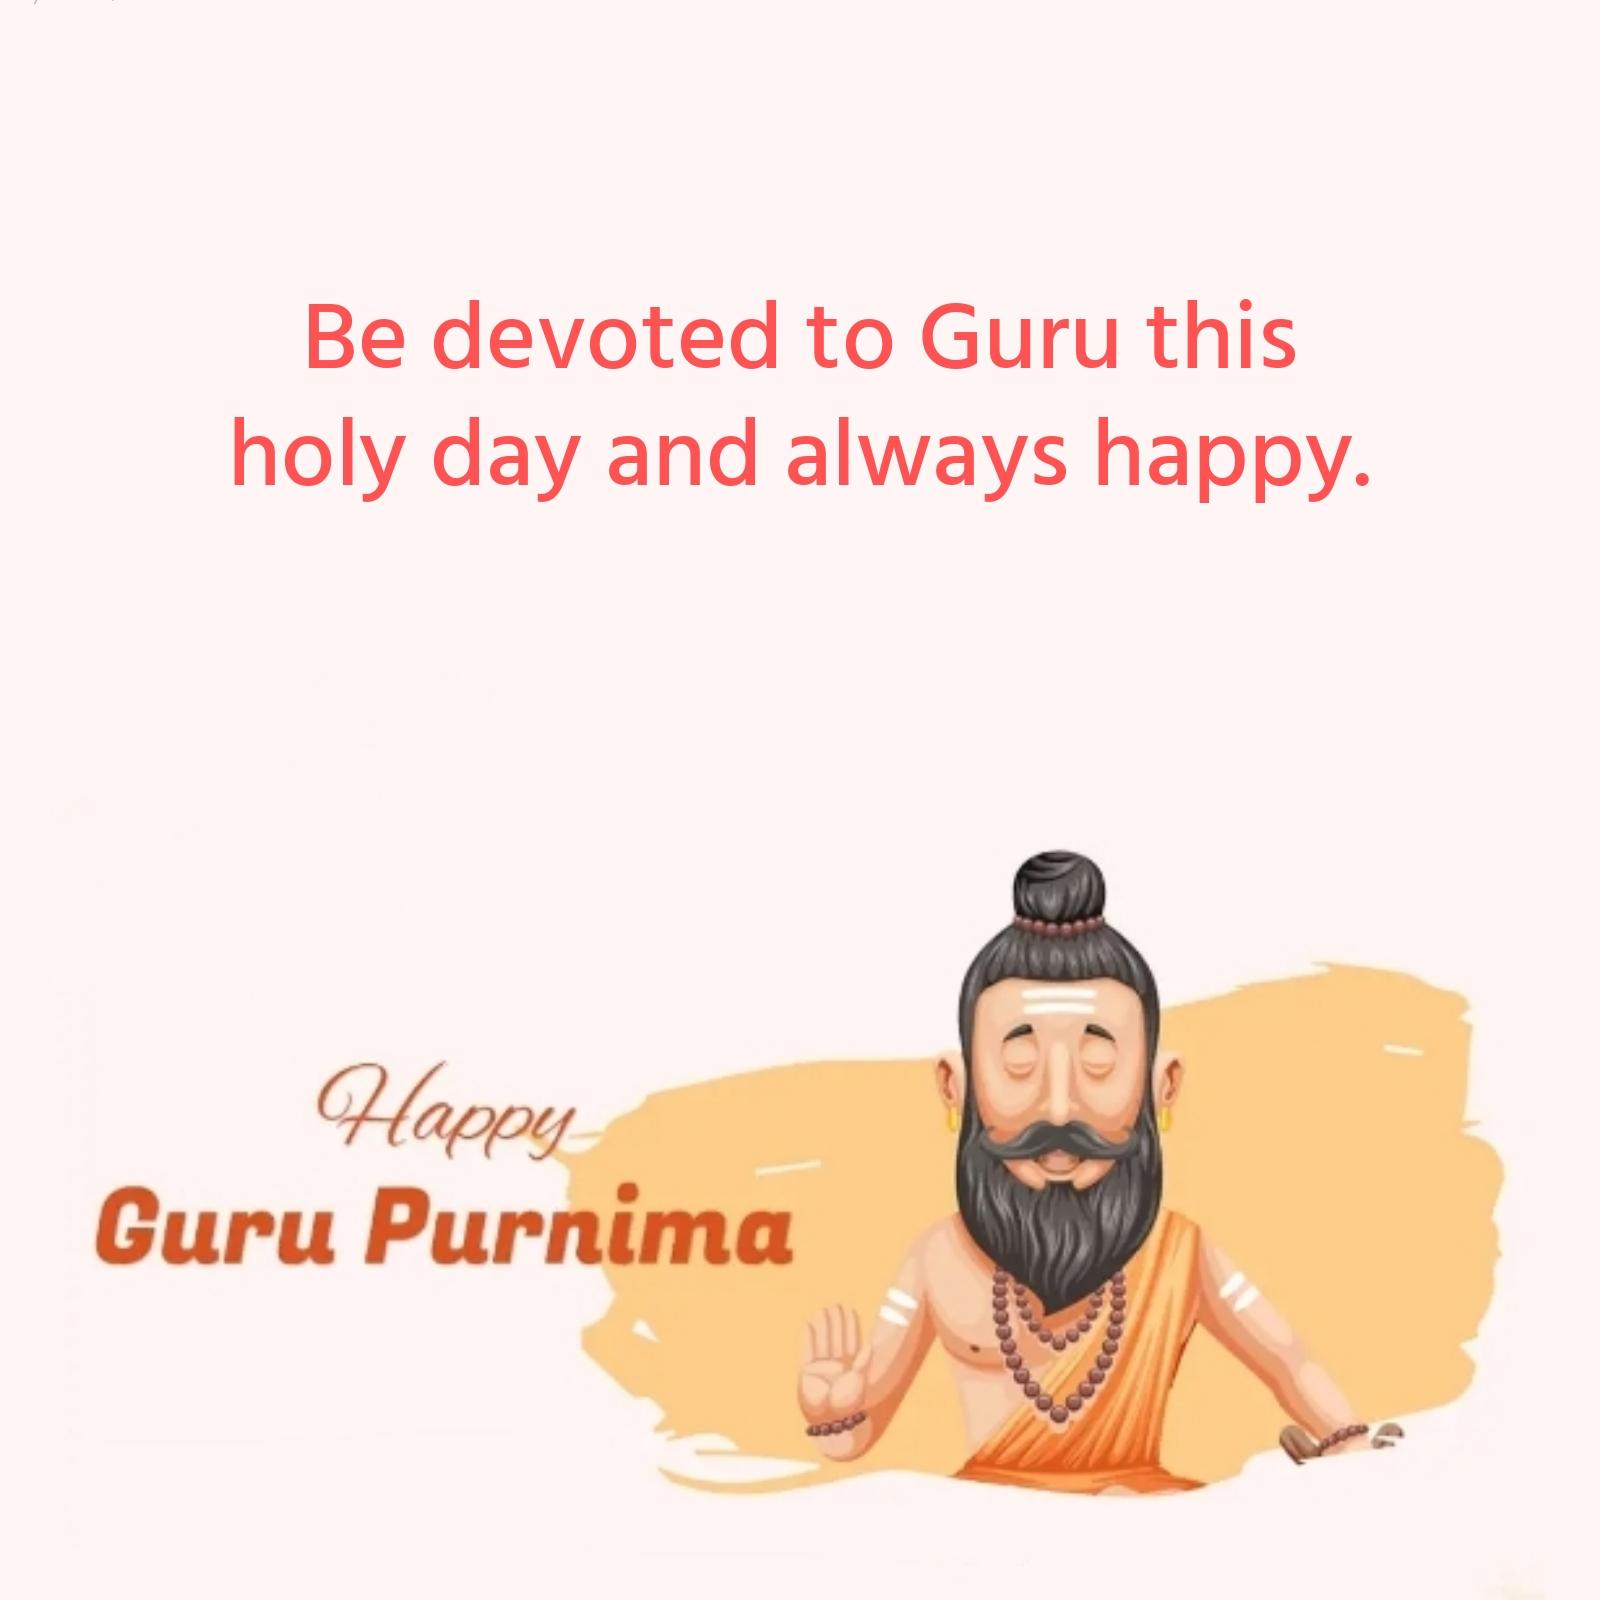 Be devoted to Guru this holy day and always happy